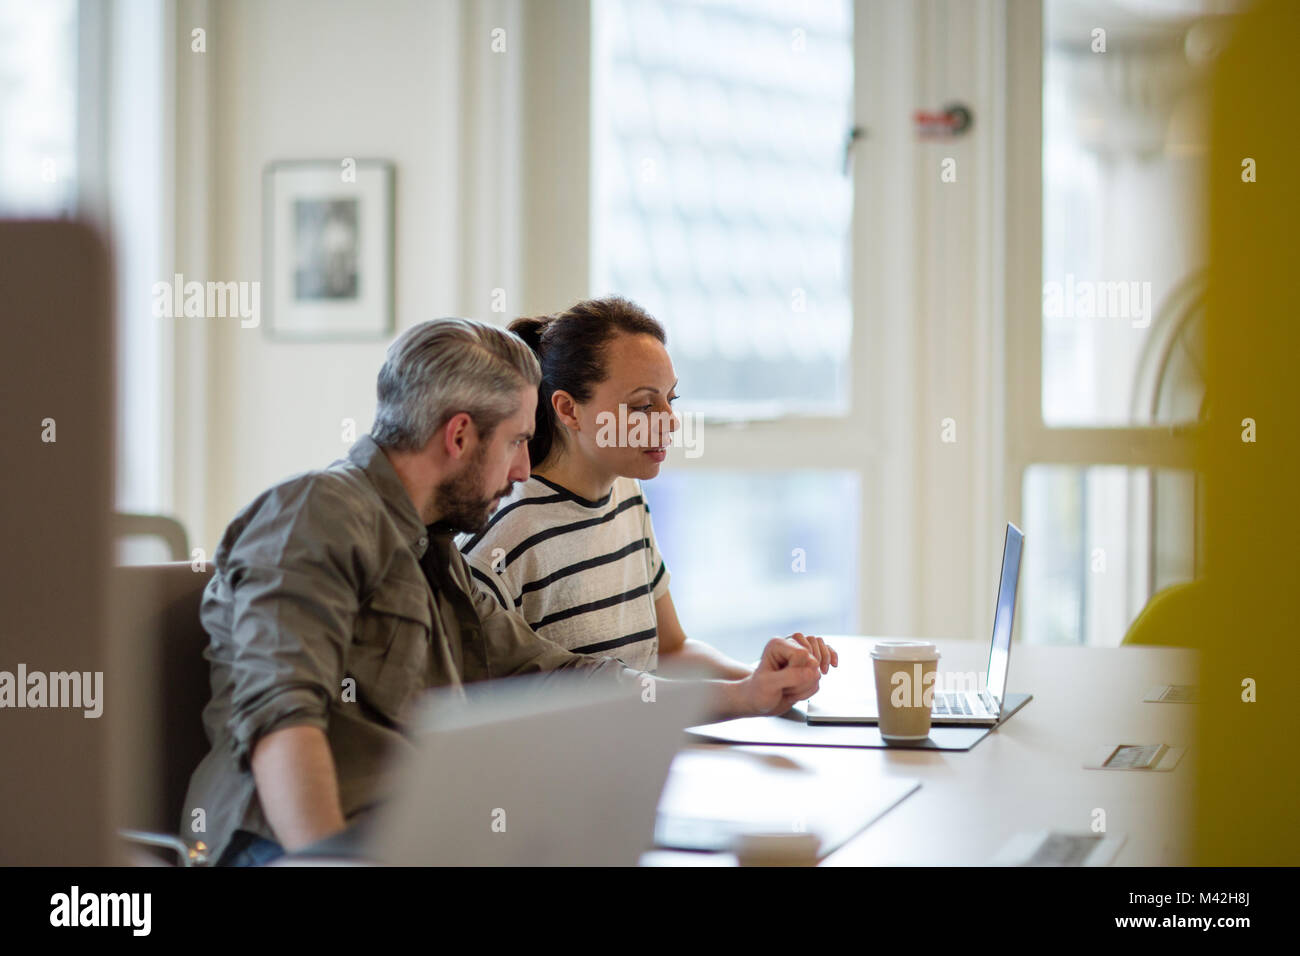 Coworkers looking at a laptop together Stock Photo